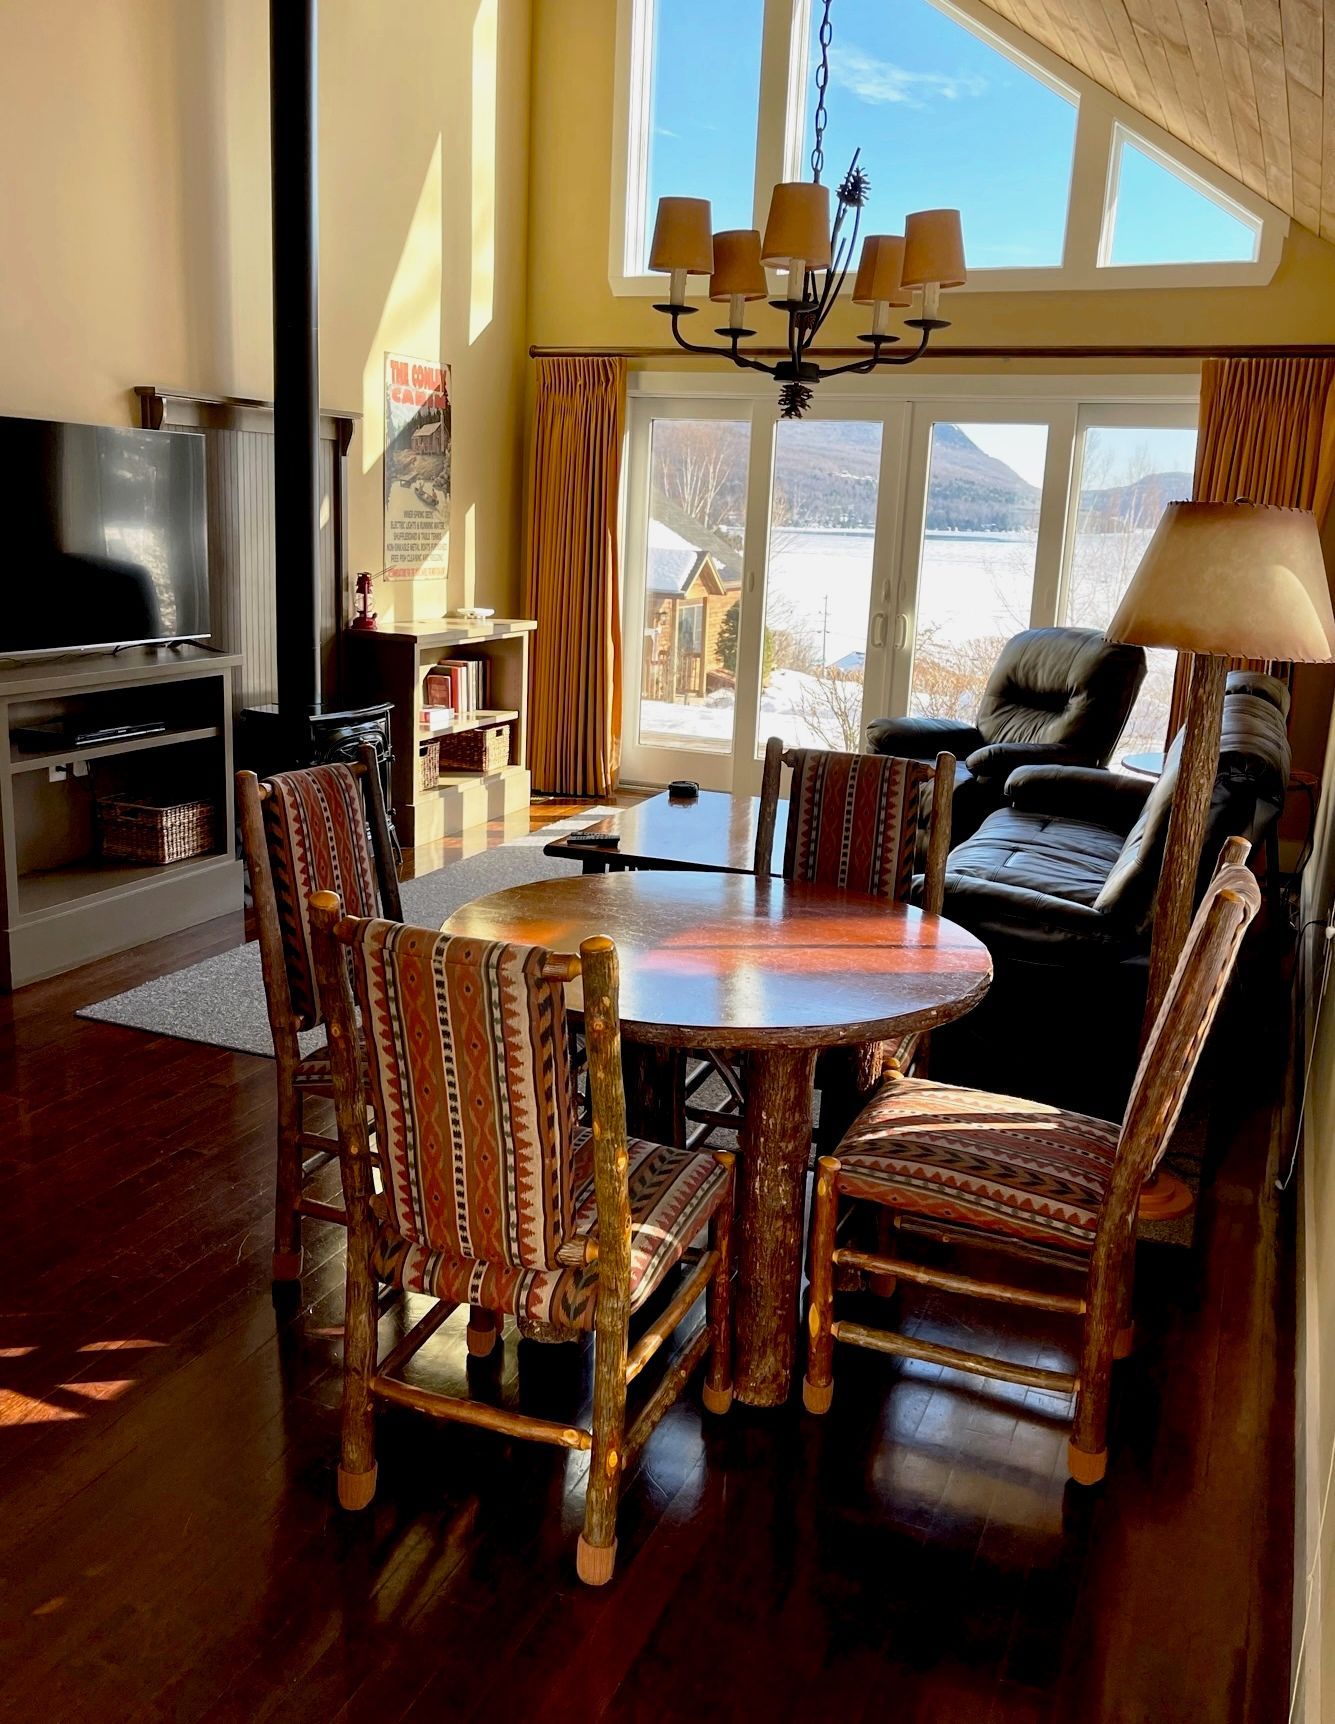 The Conley Lakeview Cottage vacation rental overlooking Lake Willoughby in VT.